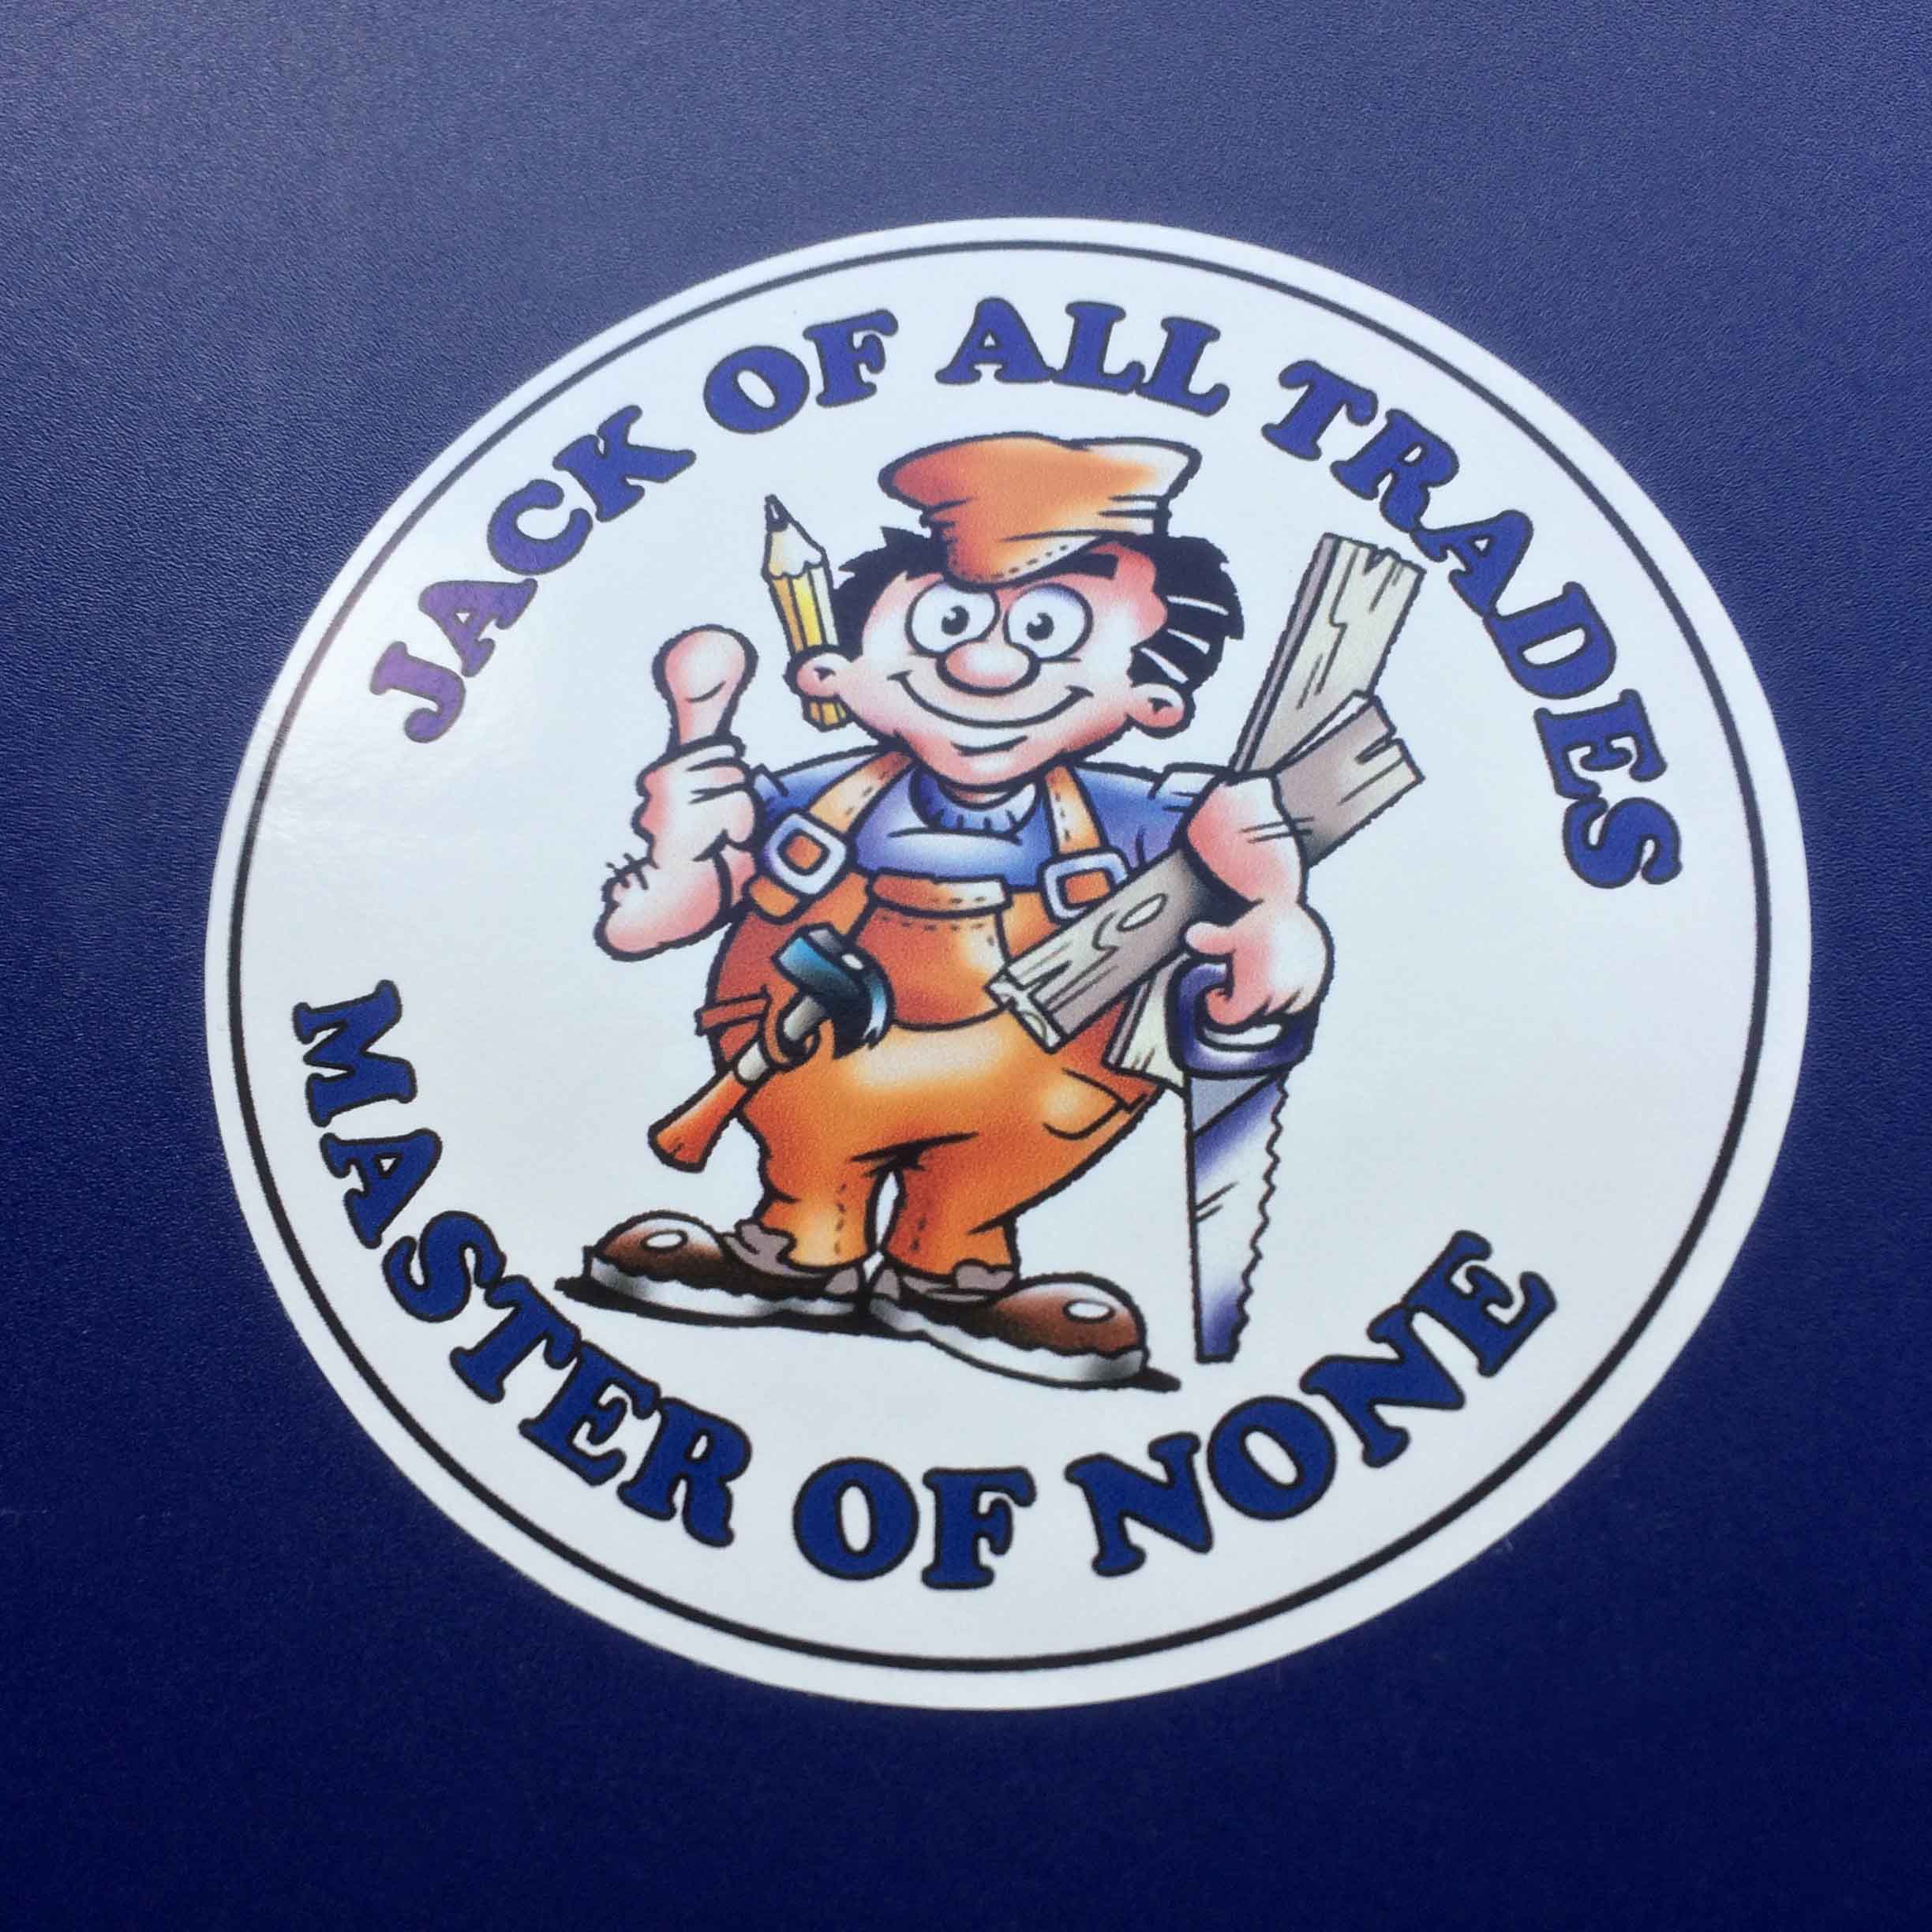 JACK OF ALL TRADES HUMOROUS STICKER. Jack Of All Trades Master Of None in blue lettering surrounds a humorous cartoon character of a man. He is wearing a blue shirt, brown cap with a pencil behind one ear, boots and dungarees. He is carrying wood, a saw and a hammer.